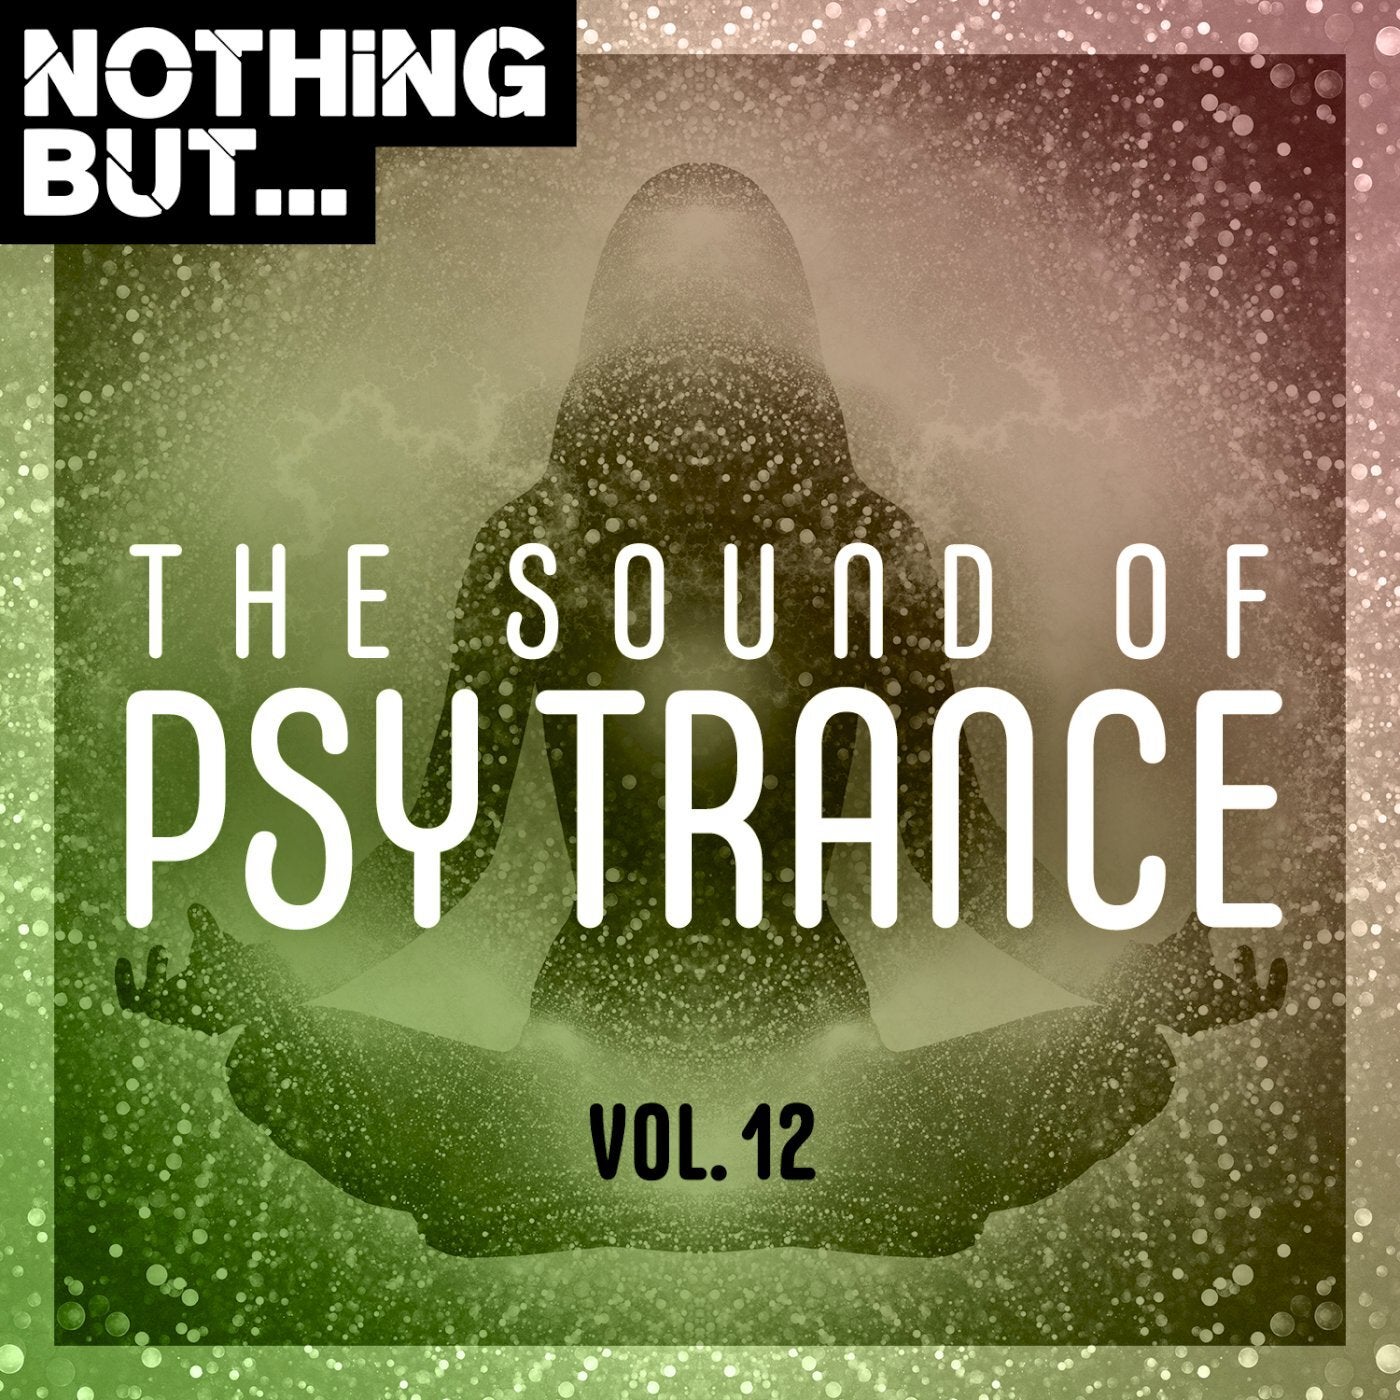 Nothing But... The Sound of Psy Trance, Vol. 12